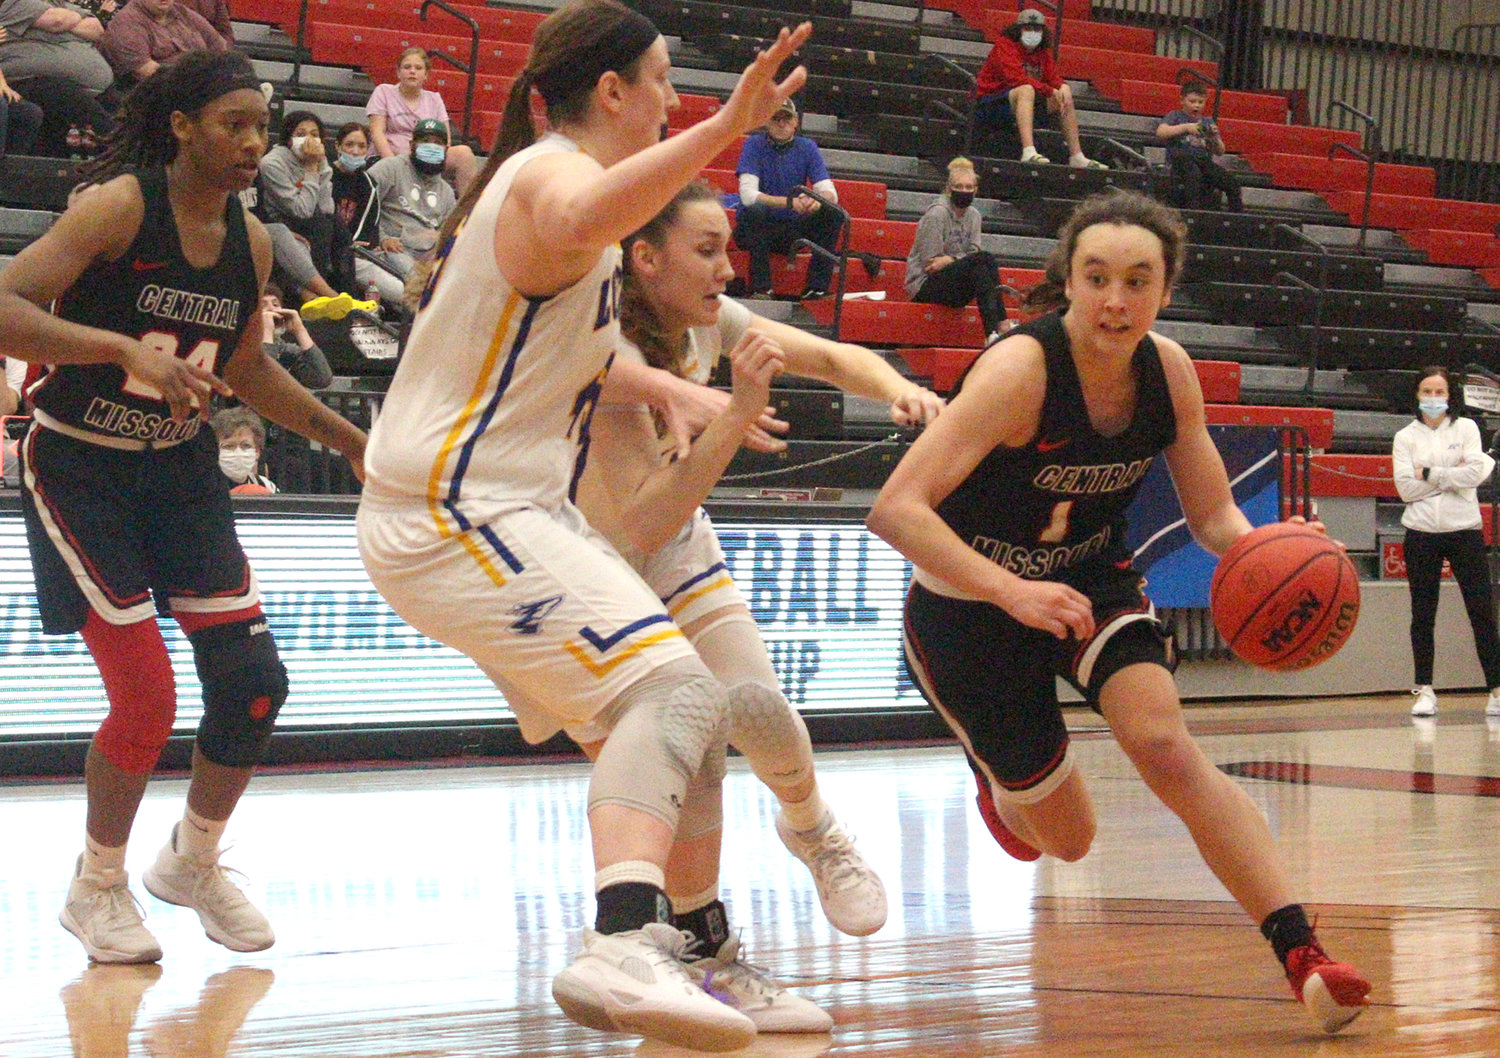 Jennies catch Lopers by storm to cap regional title game